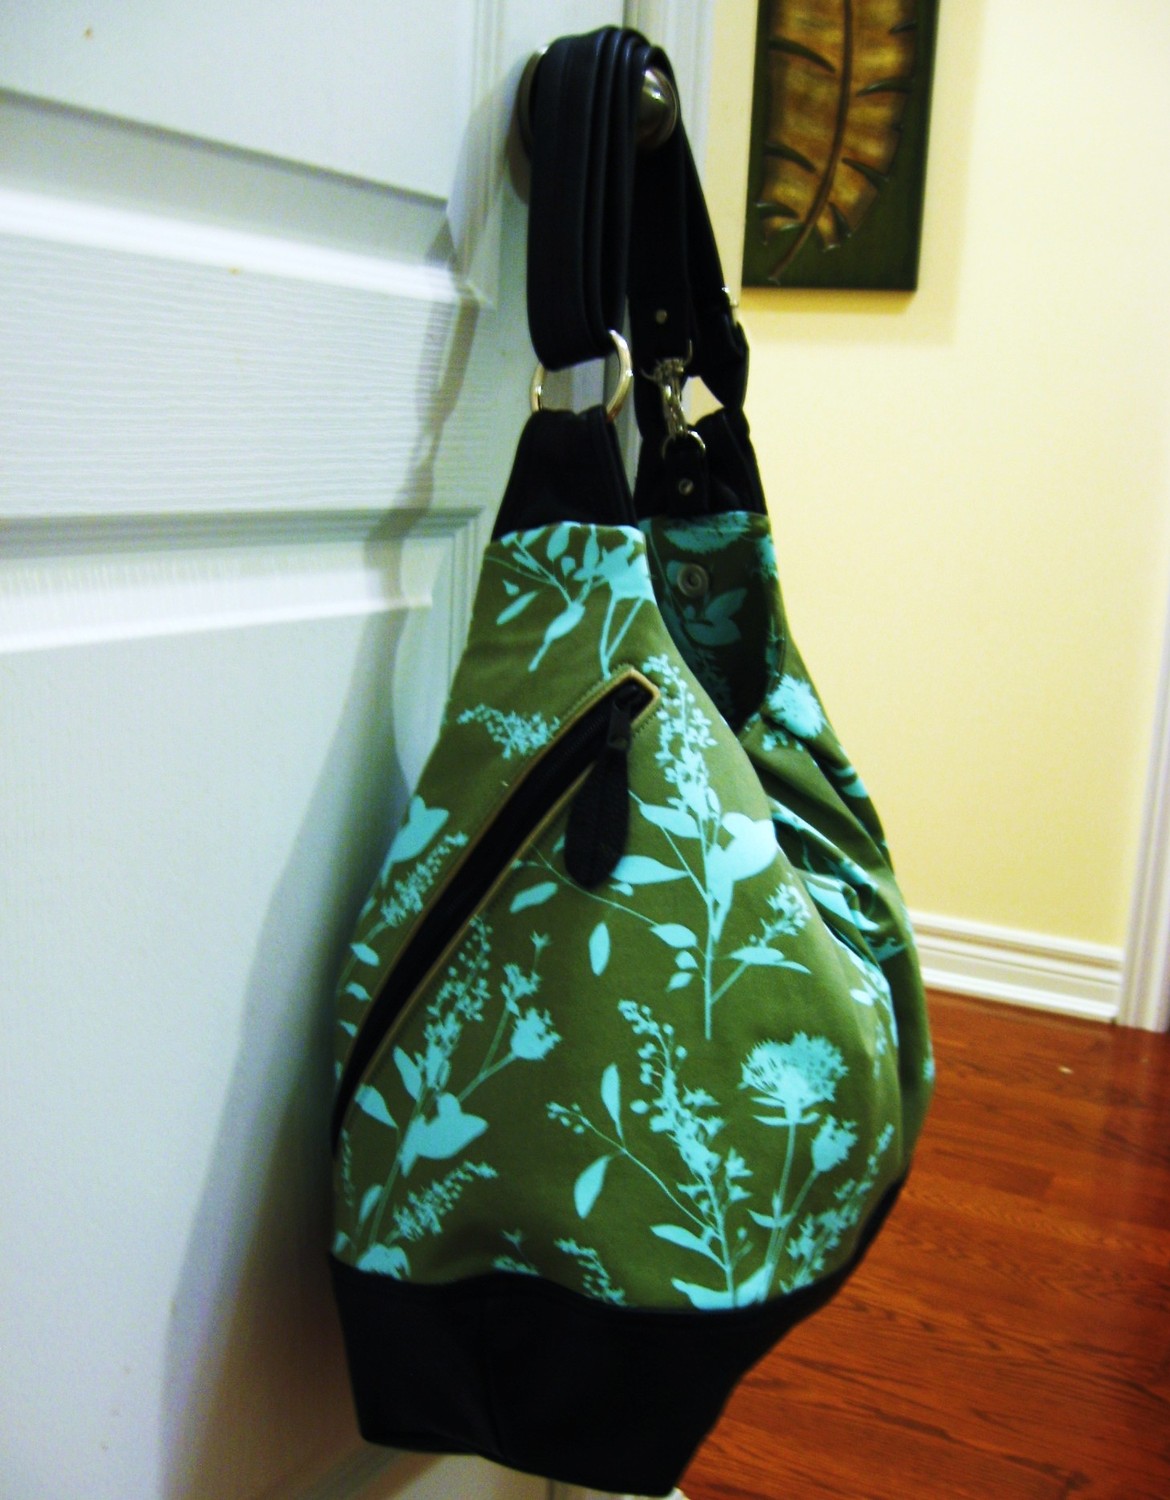 XL convertible cross body bag with leather straps, zipper top closure, and bottom - Sage green wildflower